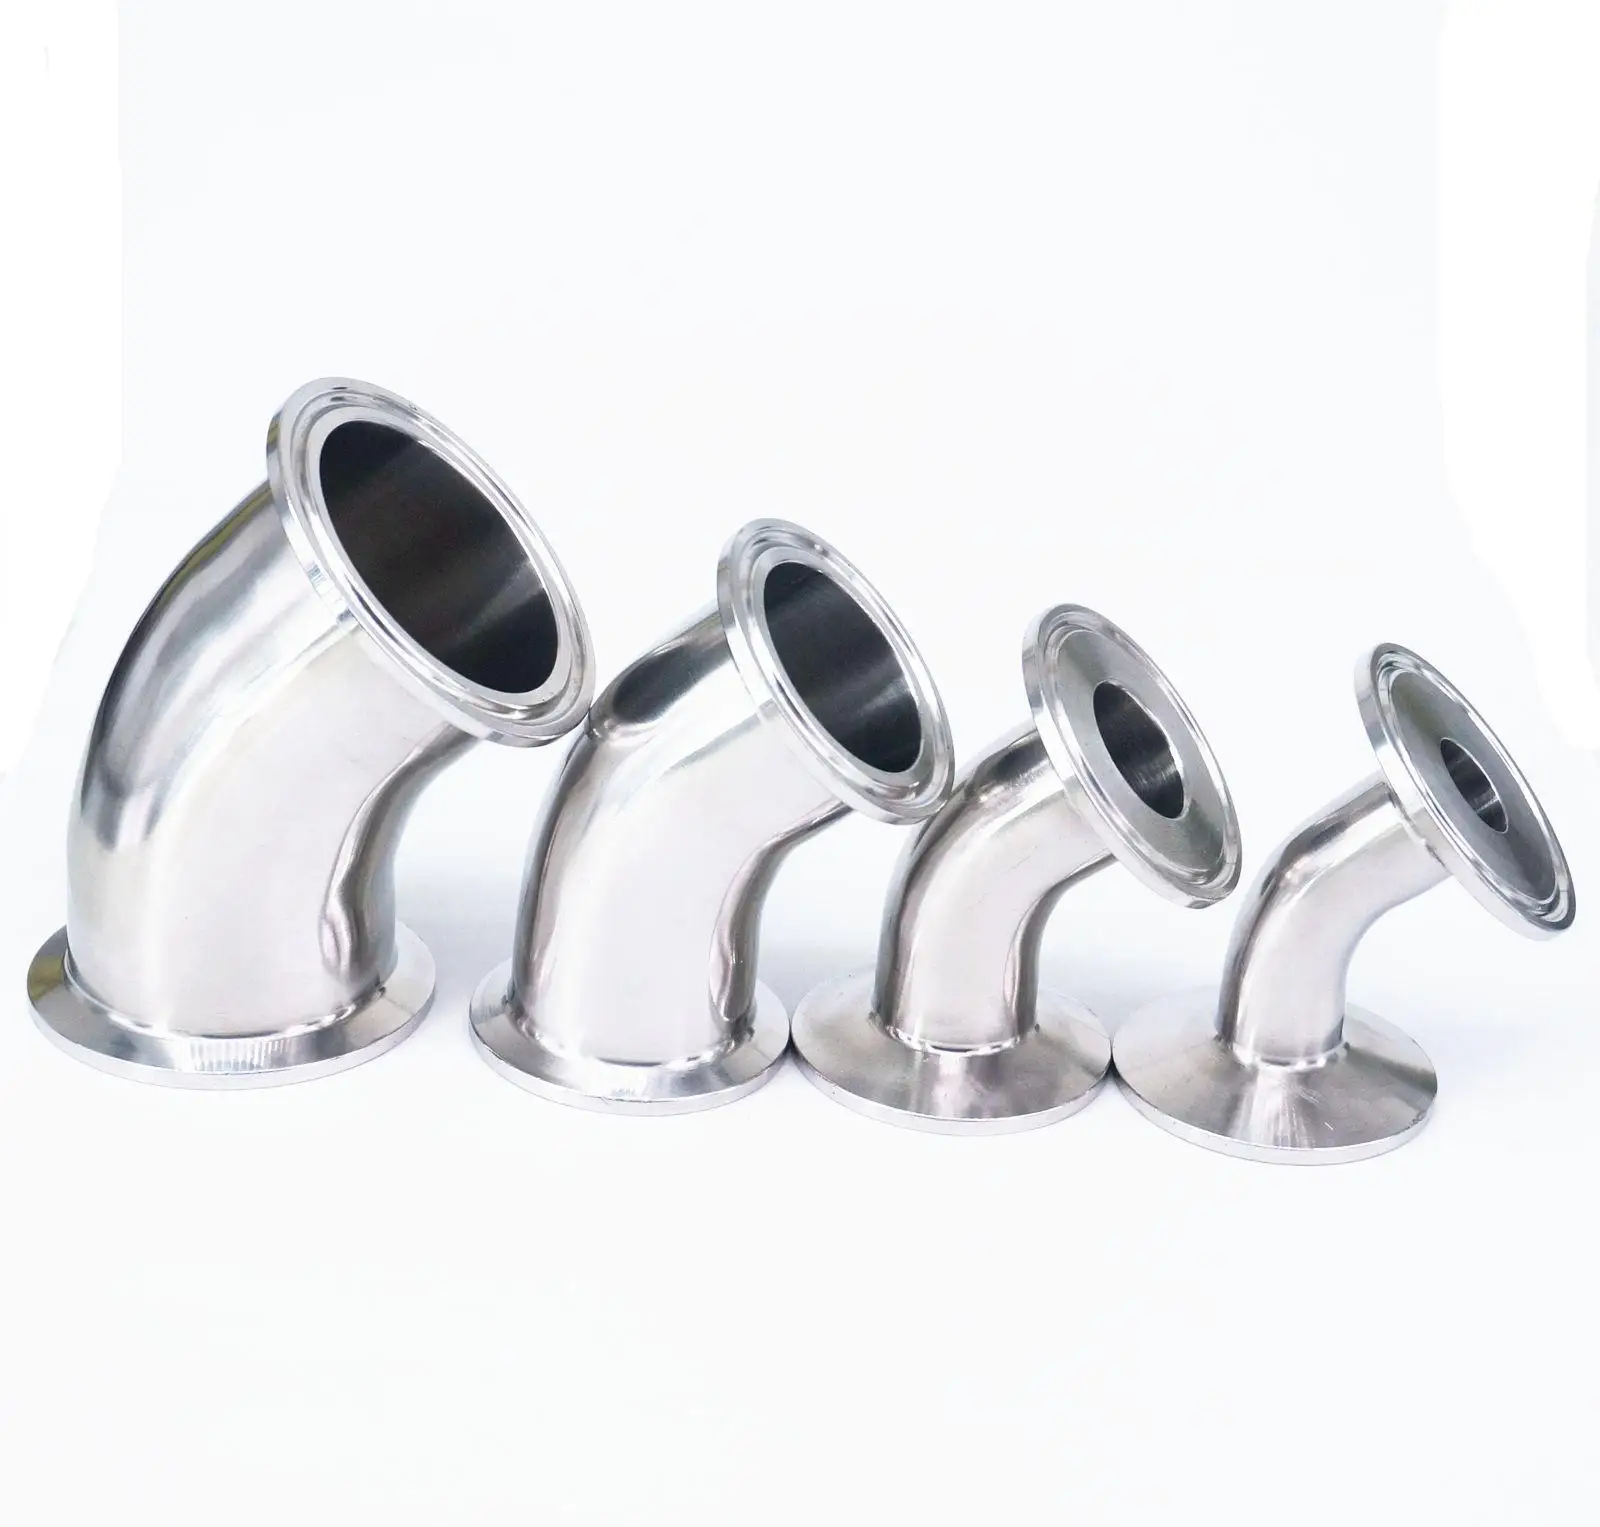 

1.5" 2" 2.5" 3" 3.5" 4" Tri Clamp 304 Stainless Steel 45 Degree Elbow Sanitary Pipe Fitting Home Brew